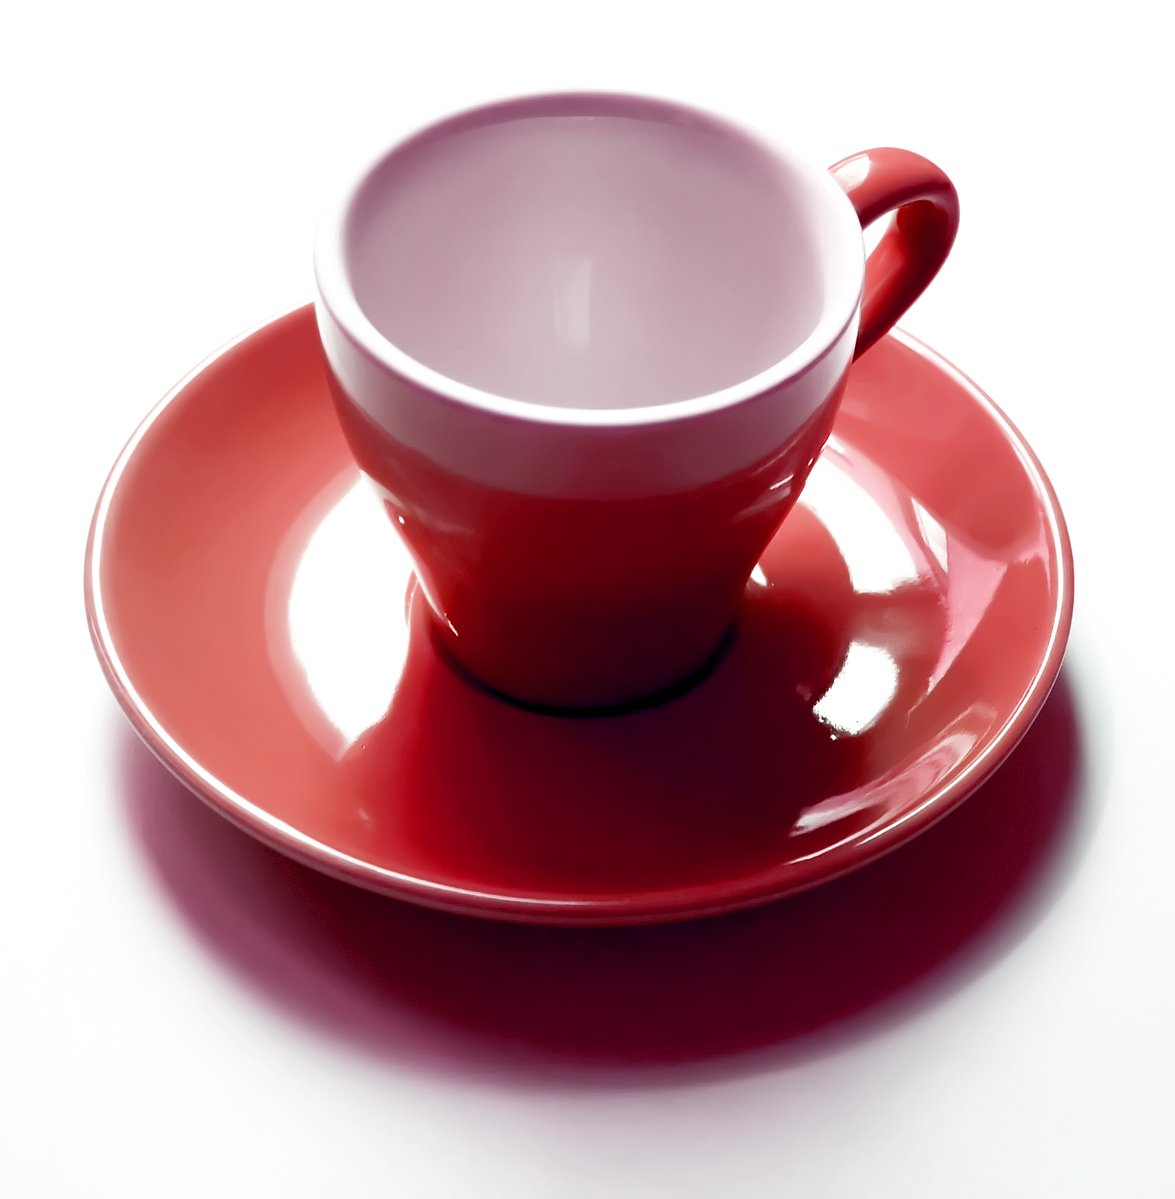 a red cup and saucer sits on a white surface